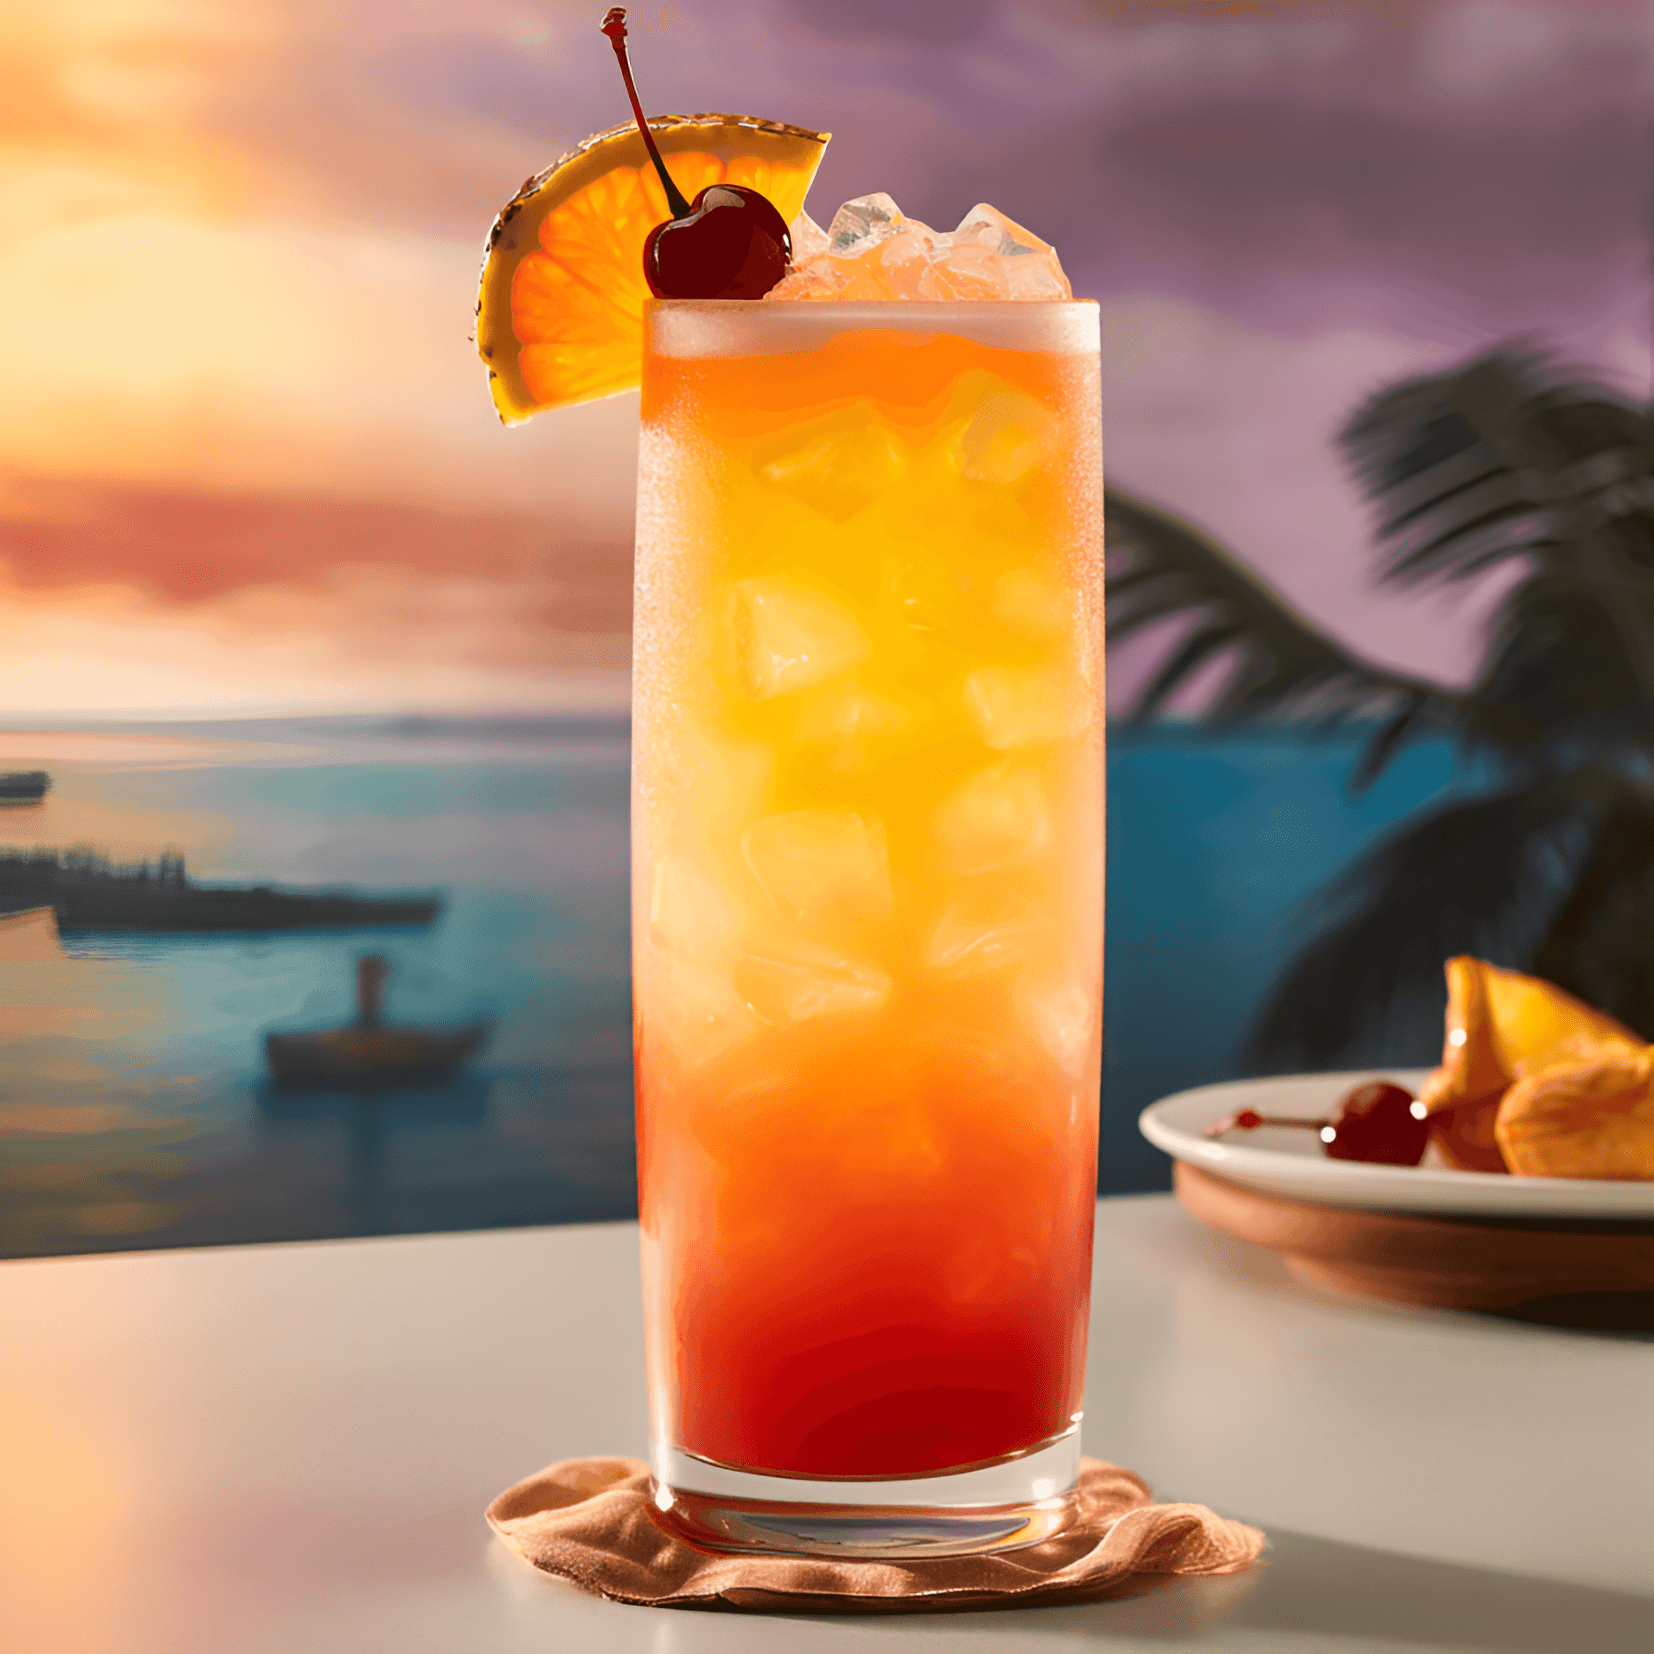 Island Affair Cocktail Recipe - The Island Affair cocktail is a sweet, fruity, and refreshing drink with a hint of tartness. The combination of tropical flavors creates a harmonious balance that is both invigorating and satisfying.